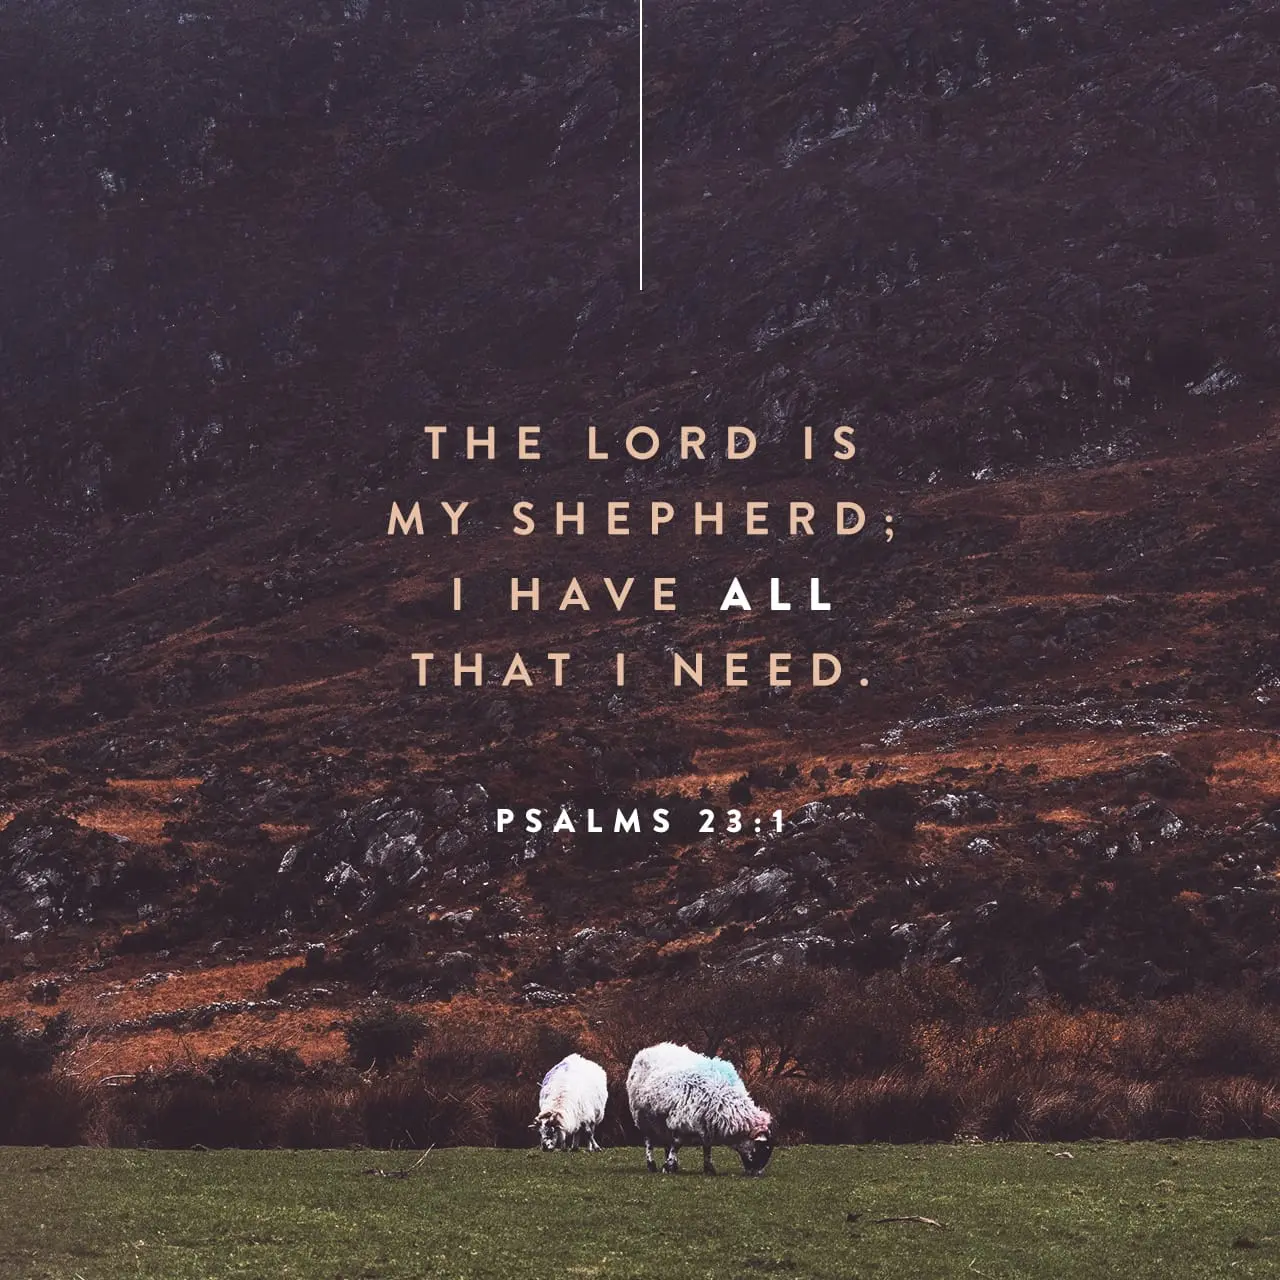 The Lord is my Shepherd; I have all that I need - Psalm 23:1